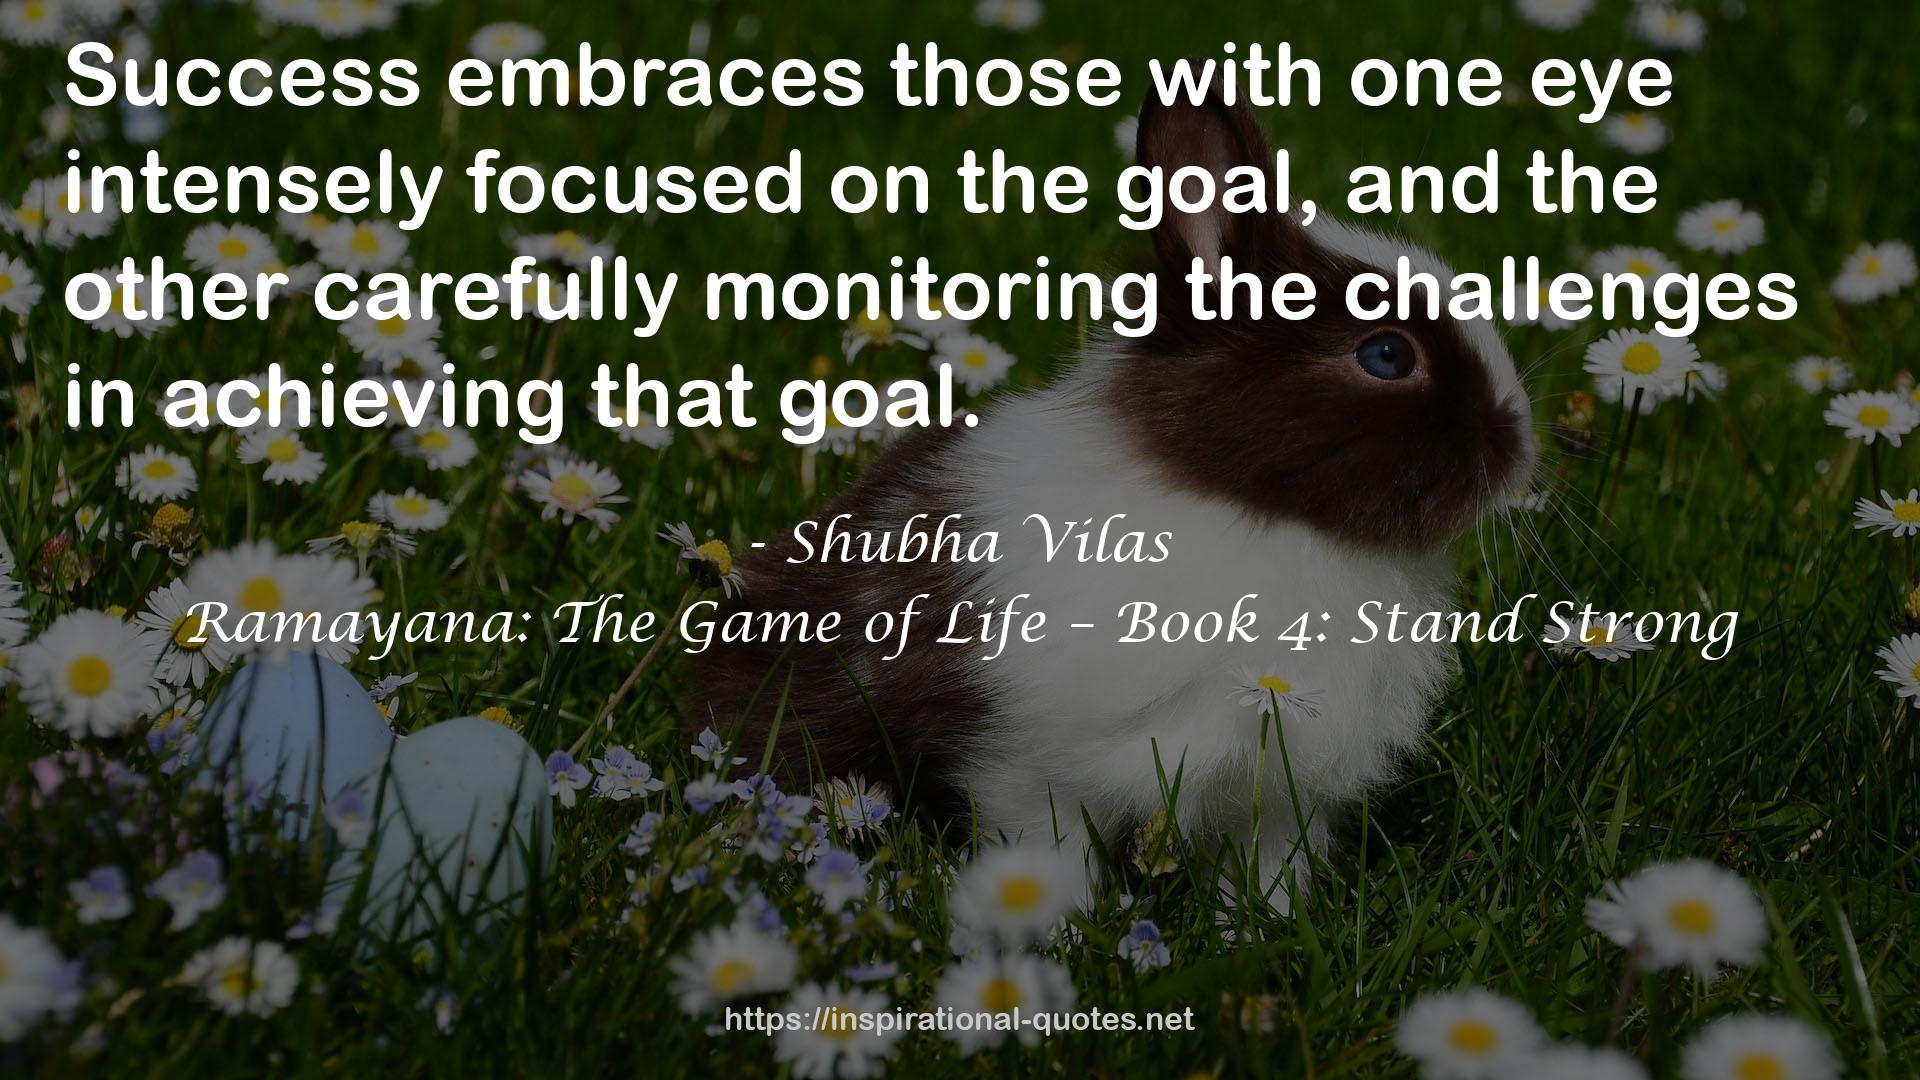 Ramayana: The Game of Life – Book 4: Stand Strong QUOTES